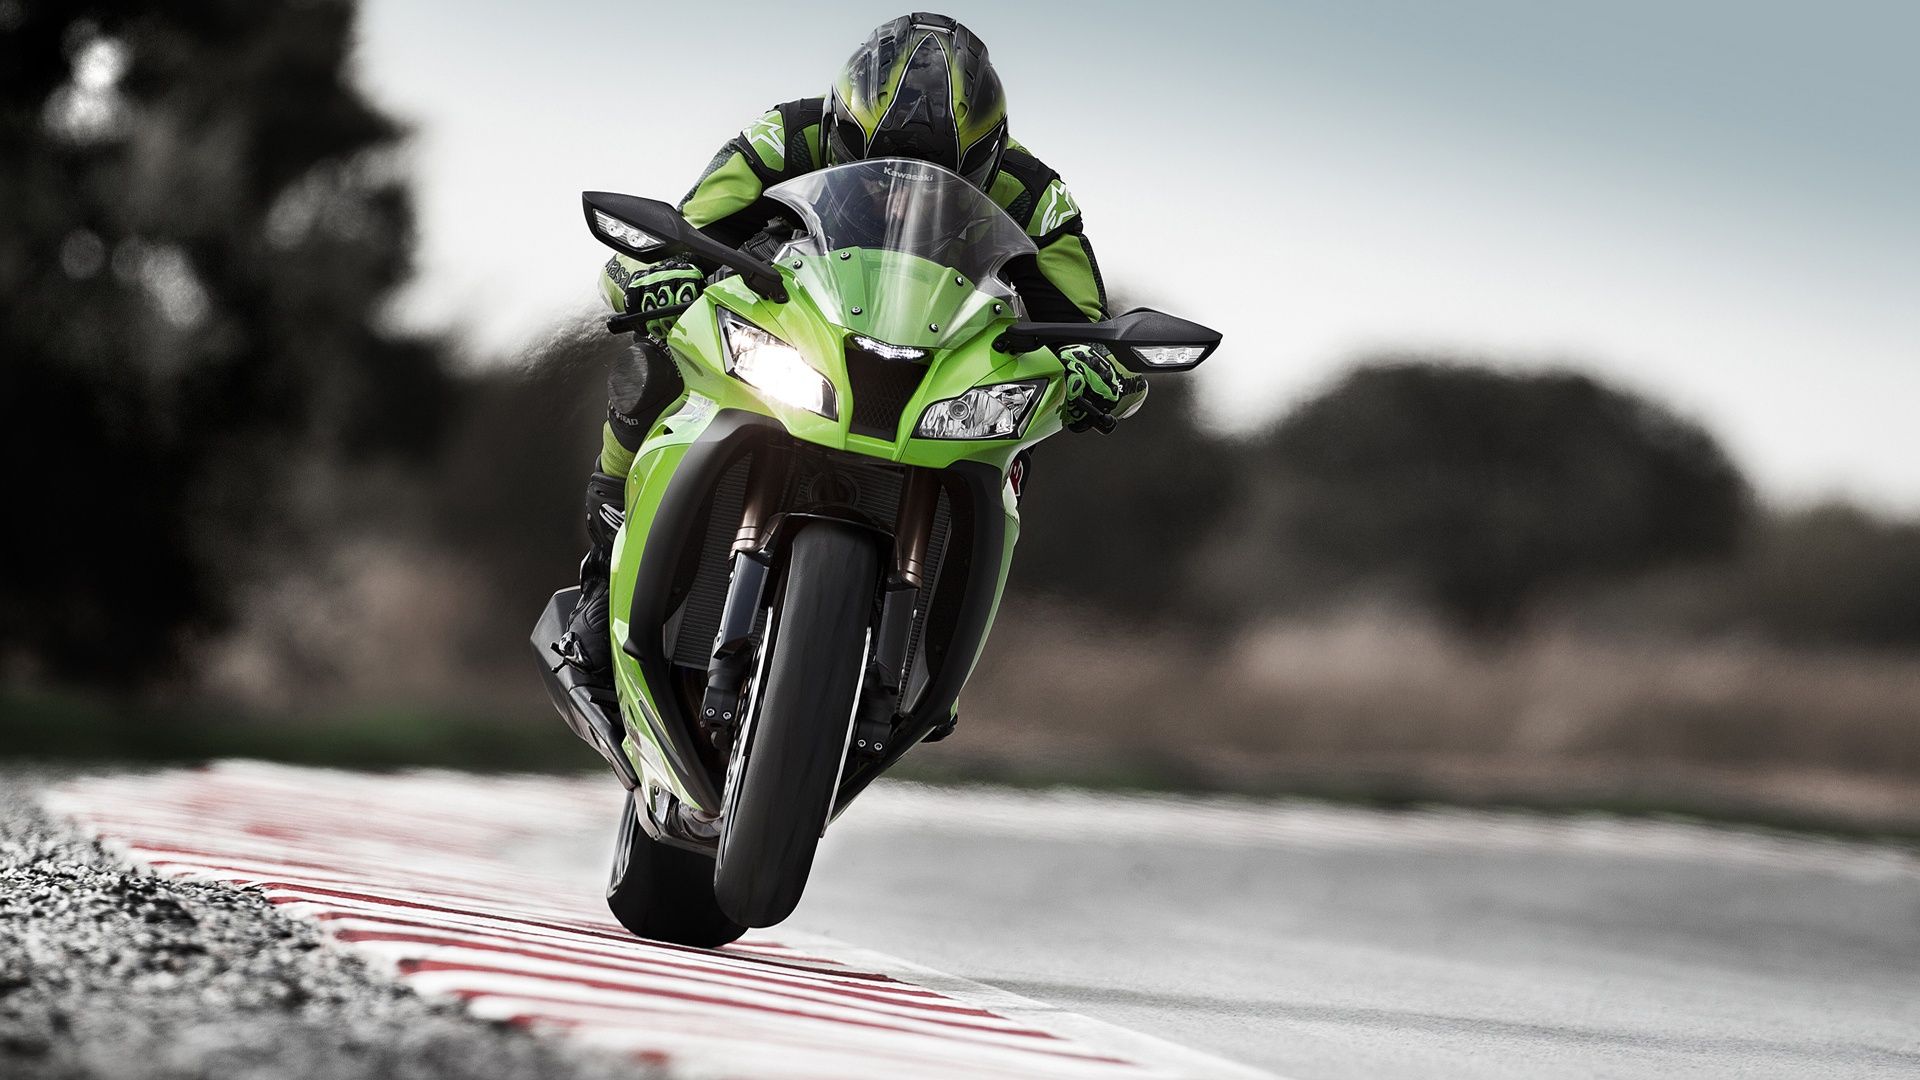 Green Motorcycle Wallpapers